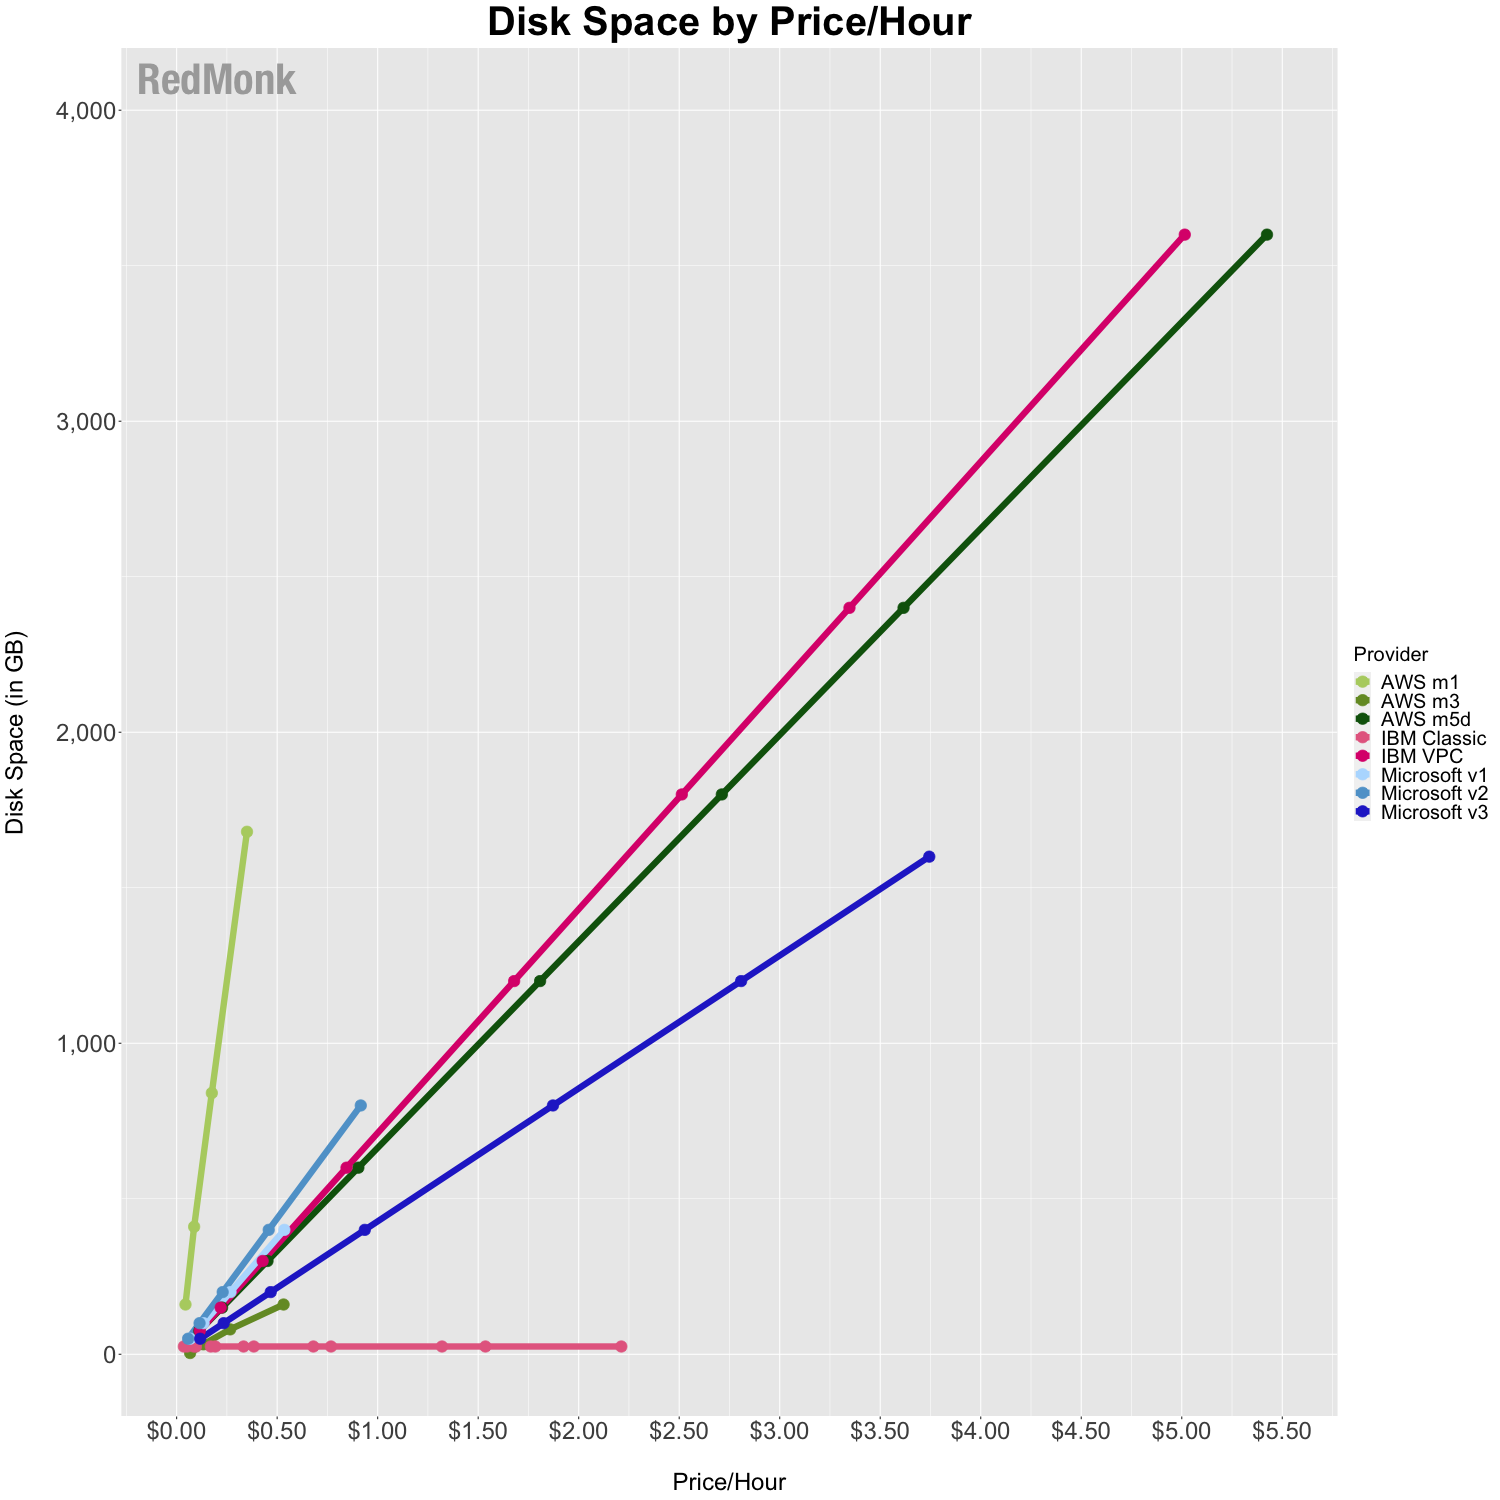 Comparison of IaaS Disk Space Pricing. X-Axis is price/hour, Y-Axis is GB of Disk Space